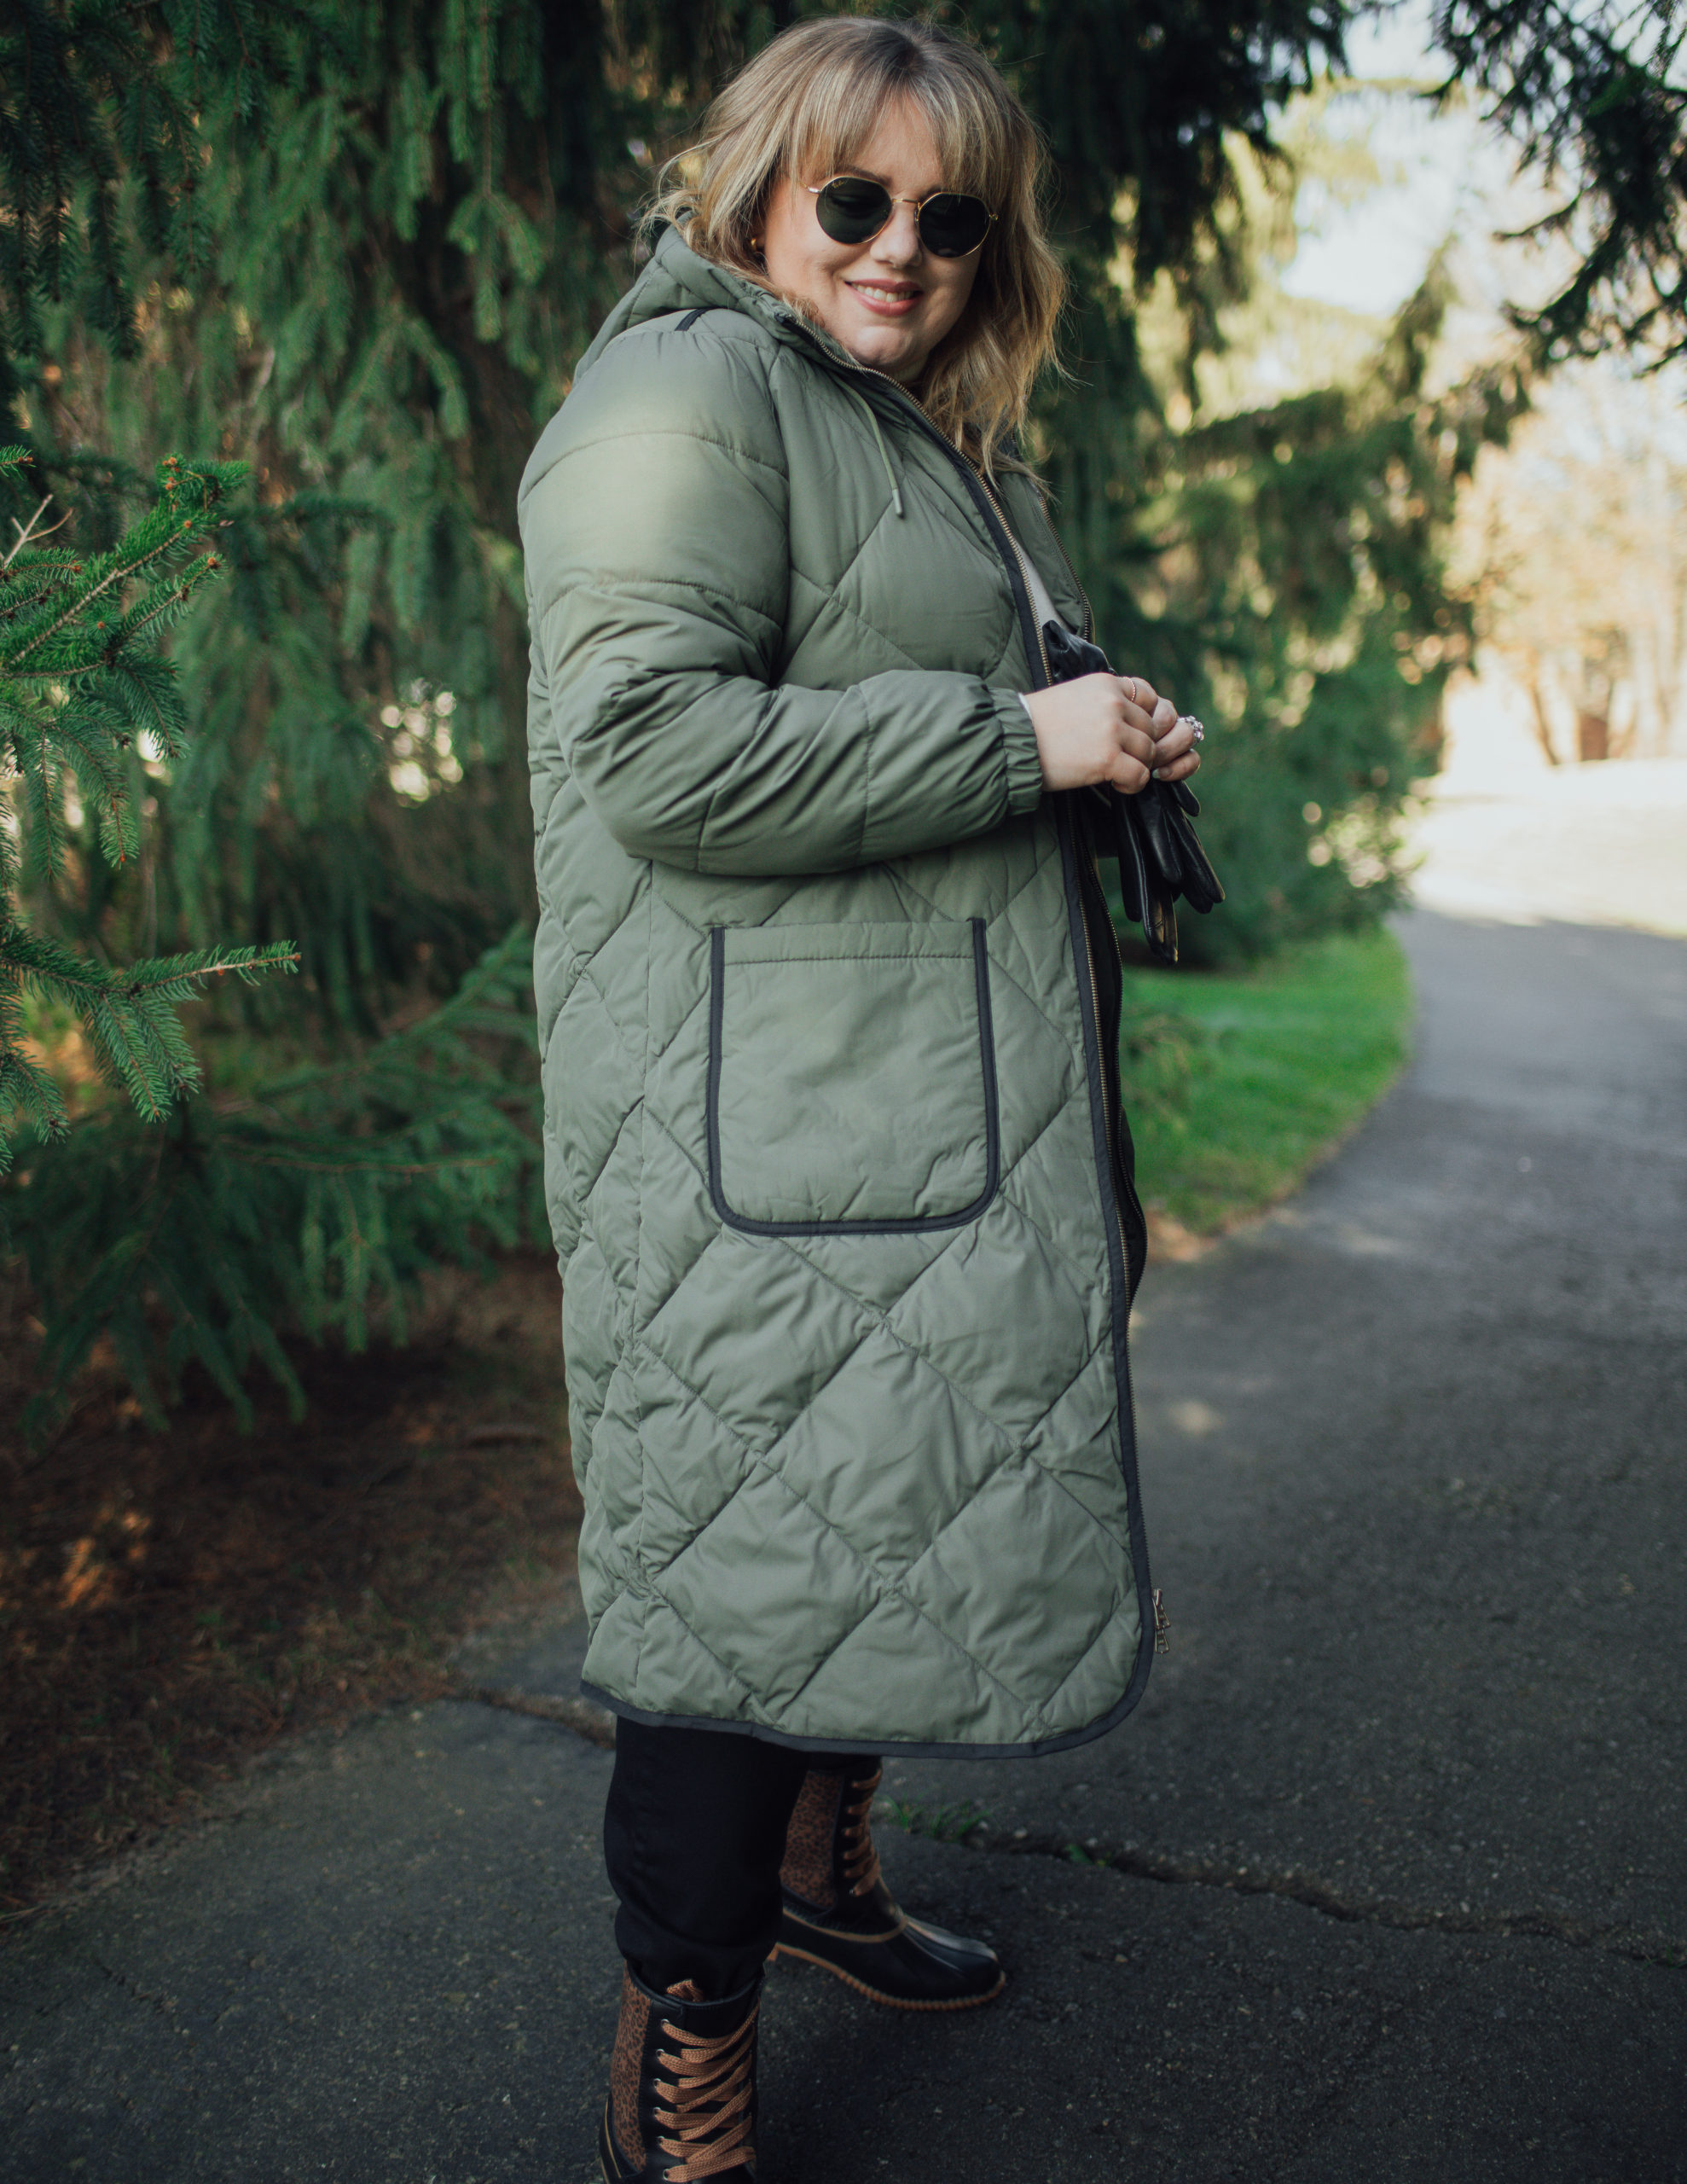 Sharing some plus size winter gear from LandsEnd. Styled in an easy chic way this look is stylish and warm. 